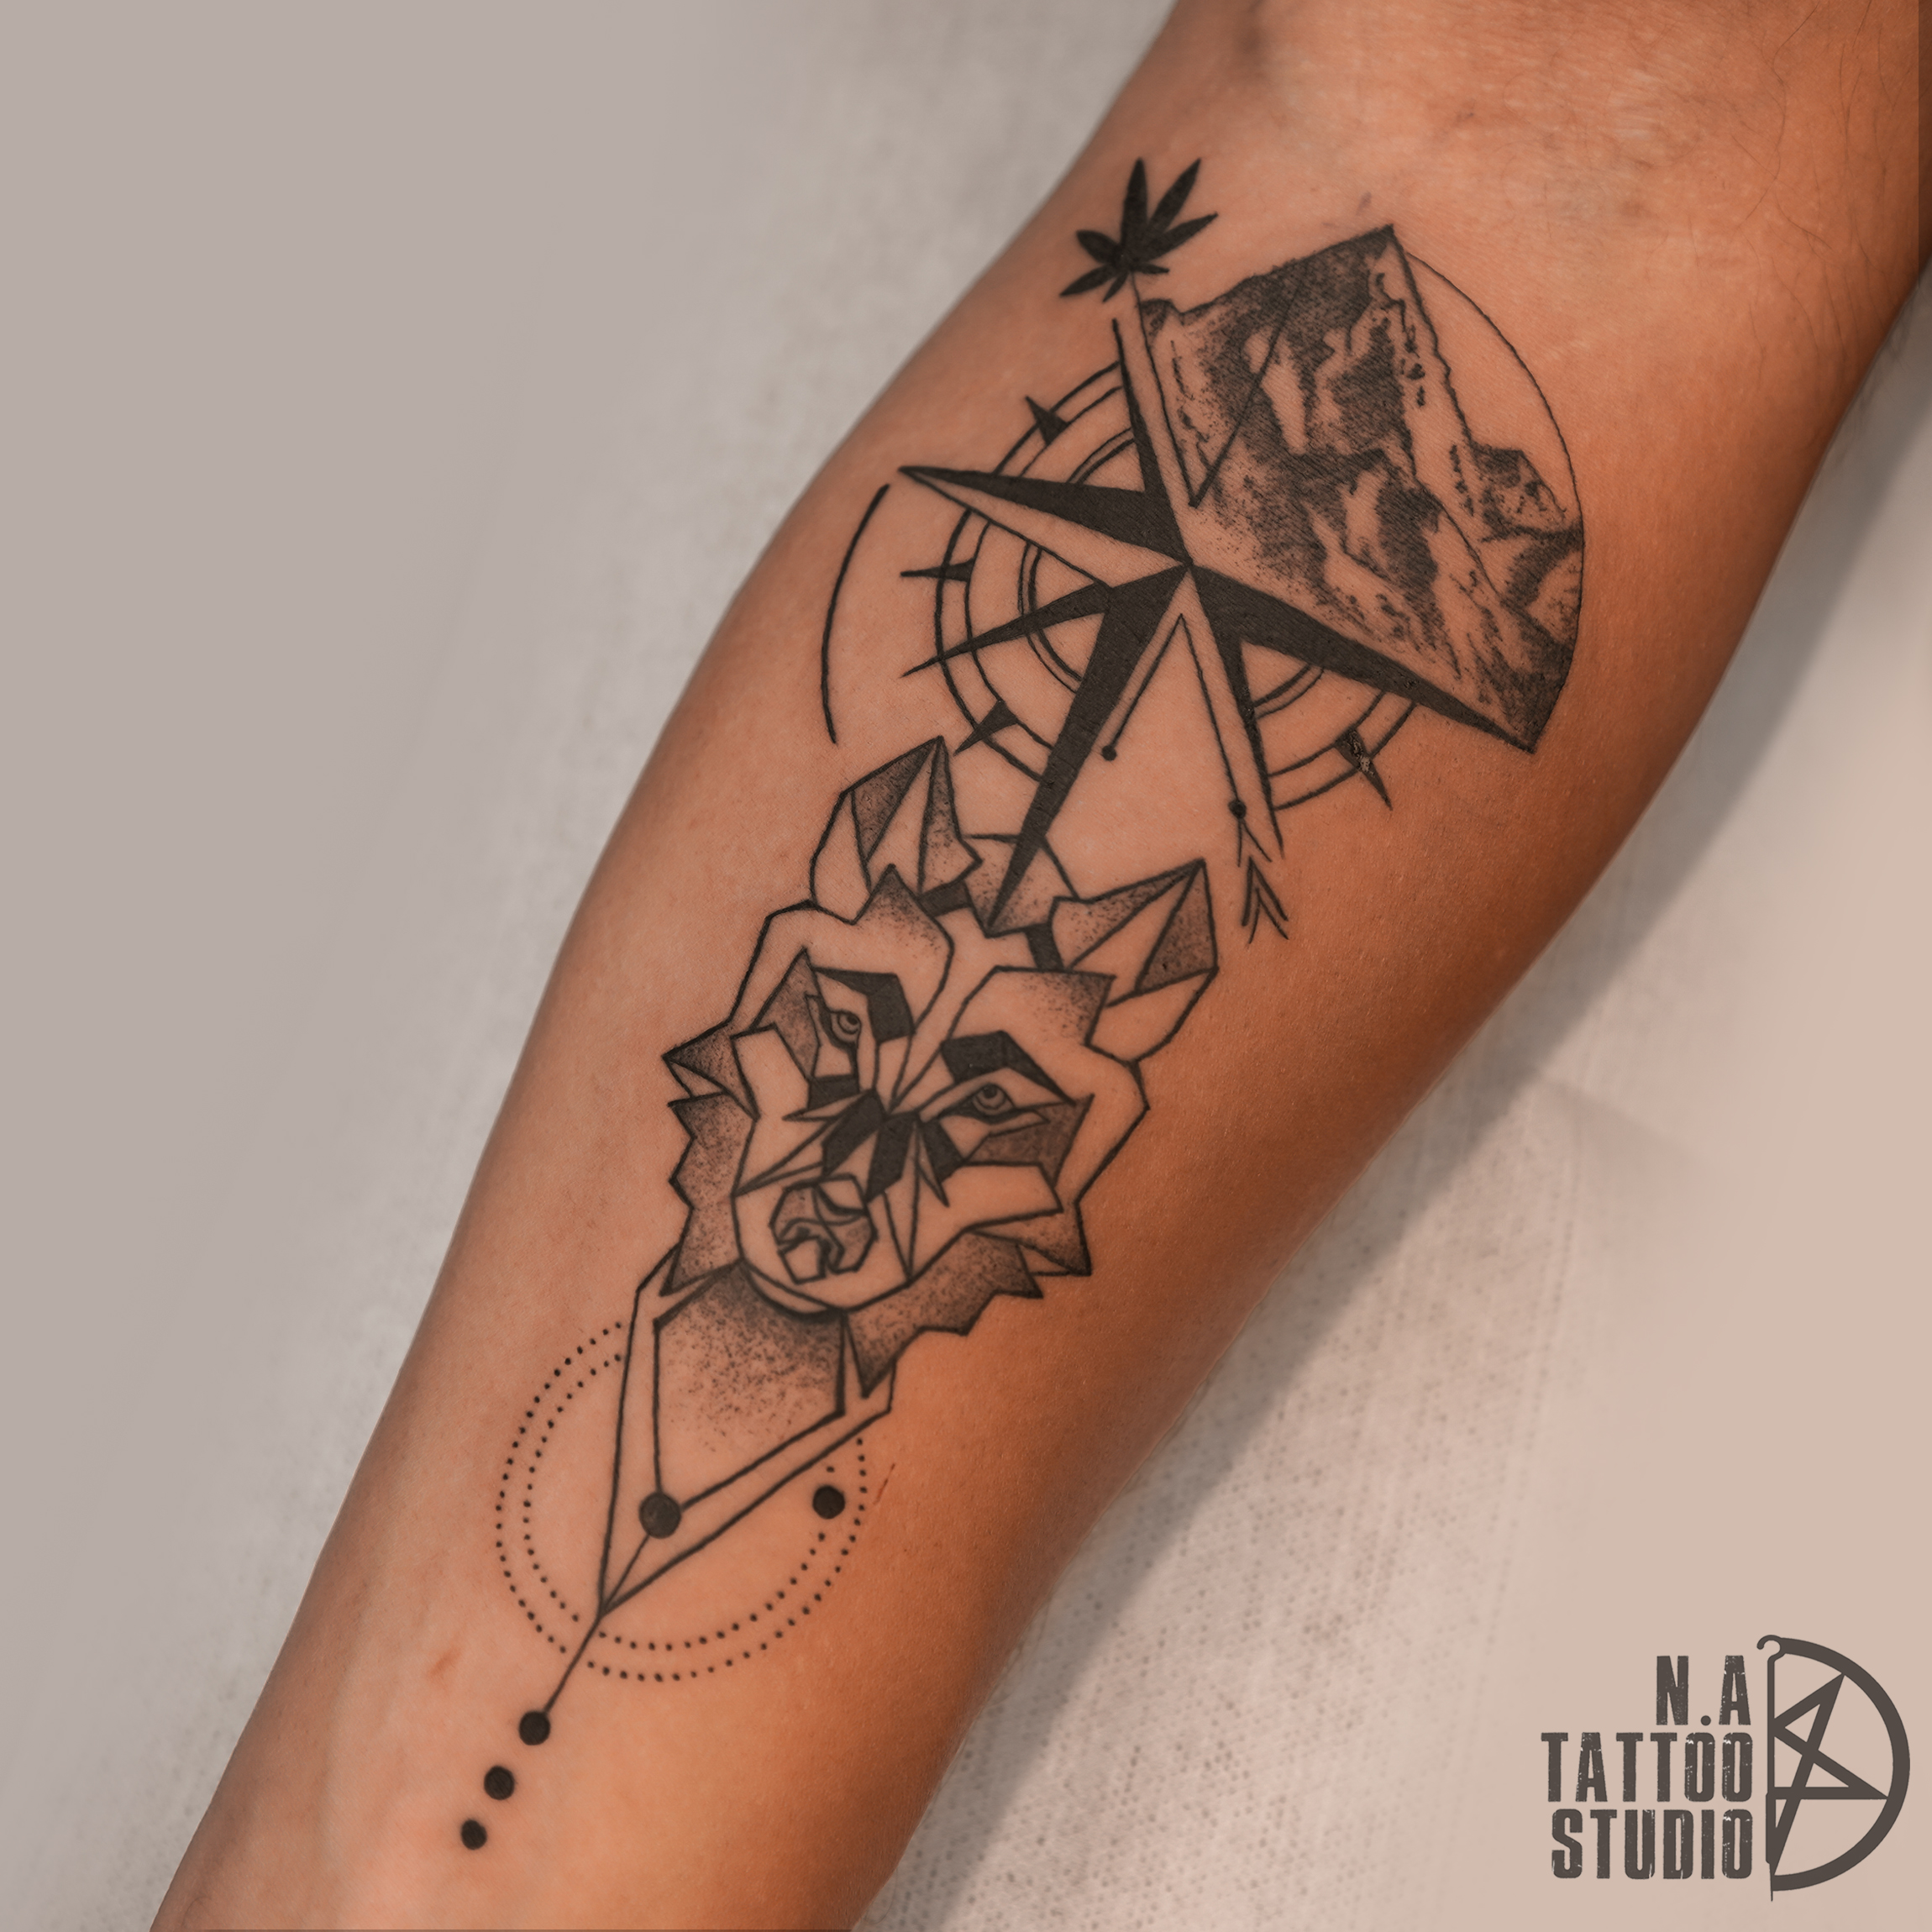 N.A Tattoo Studio - If thinking should precede acting, then acting must  succeed thinking 💥DM US TODAY FOR YOUR FREE CONSULTATION💥  =================== By Artist @sach_ink_artist For Free Consultations and  Appointments ☎ +91